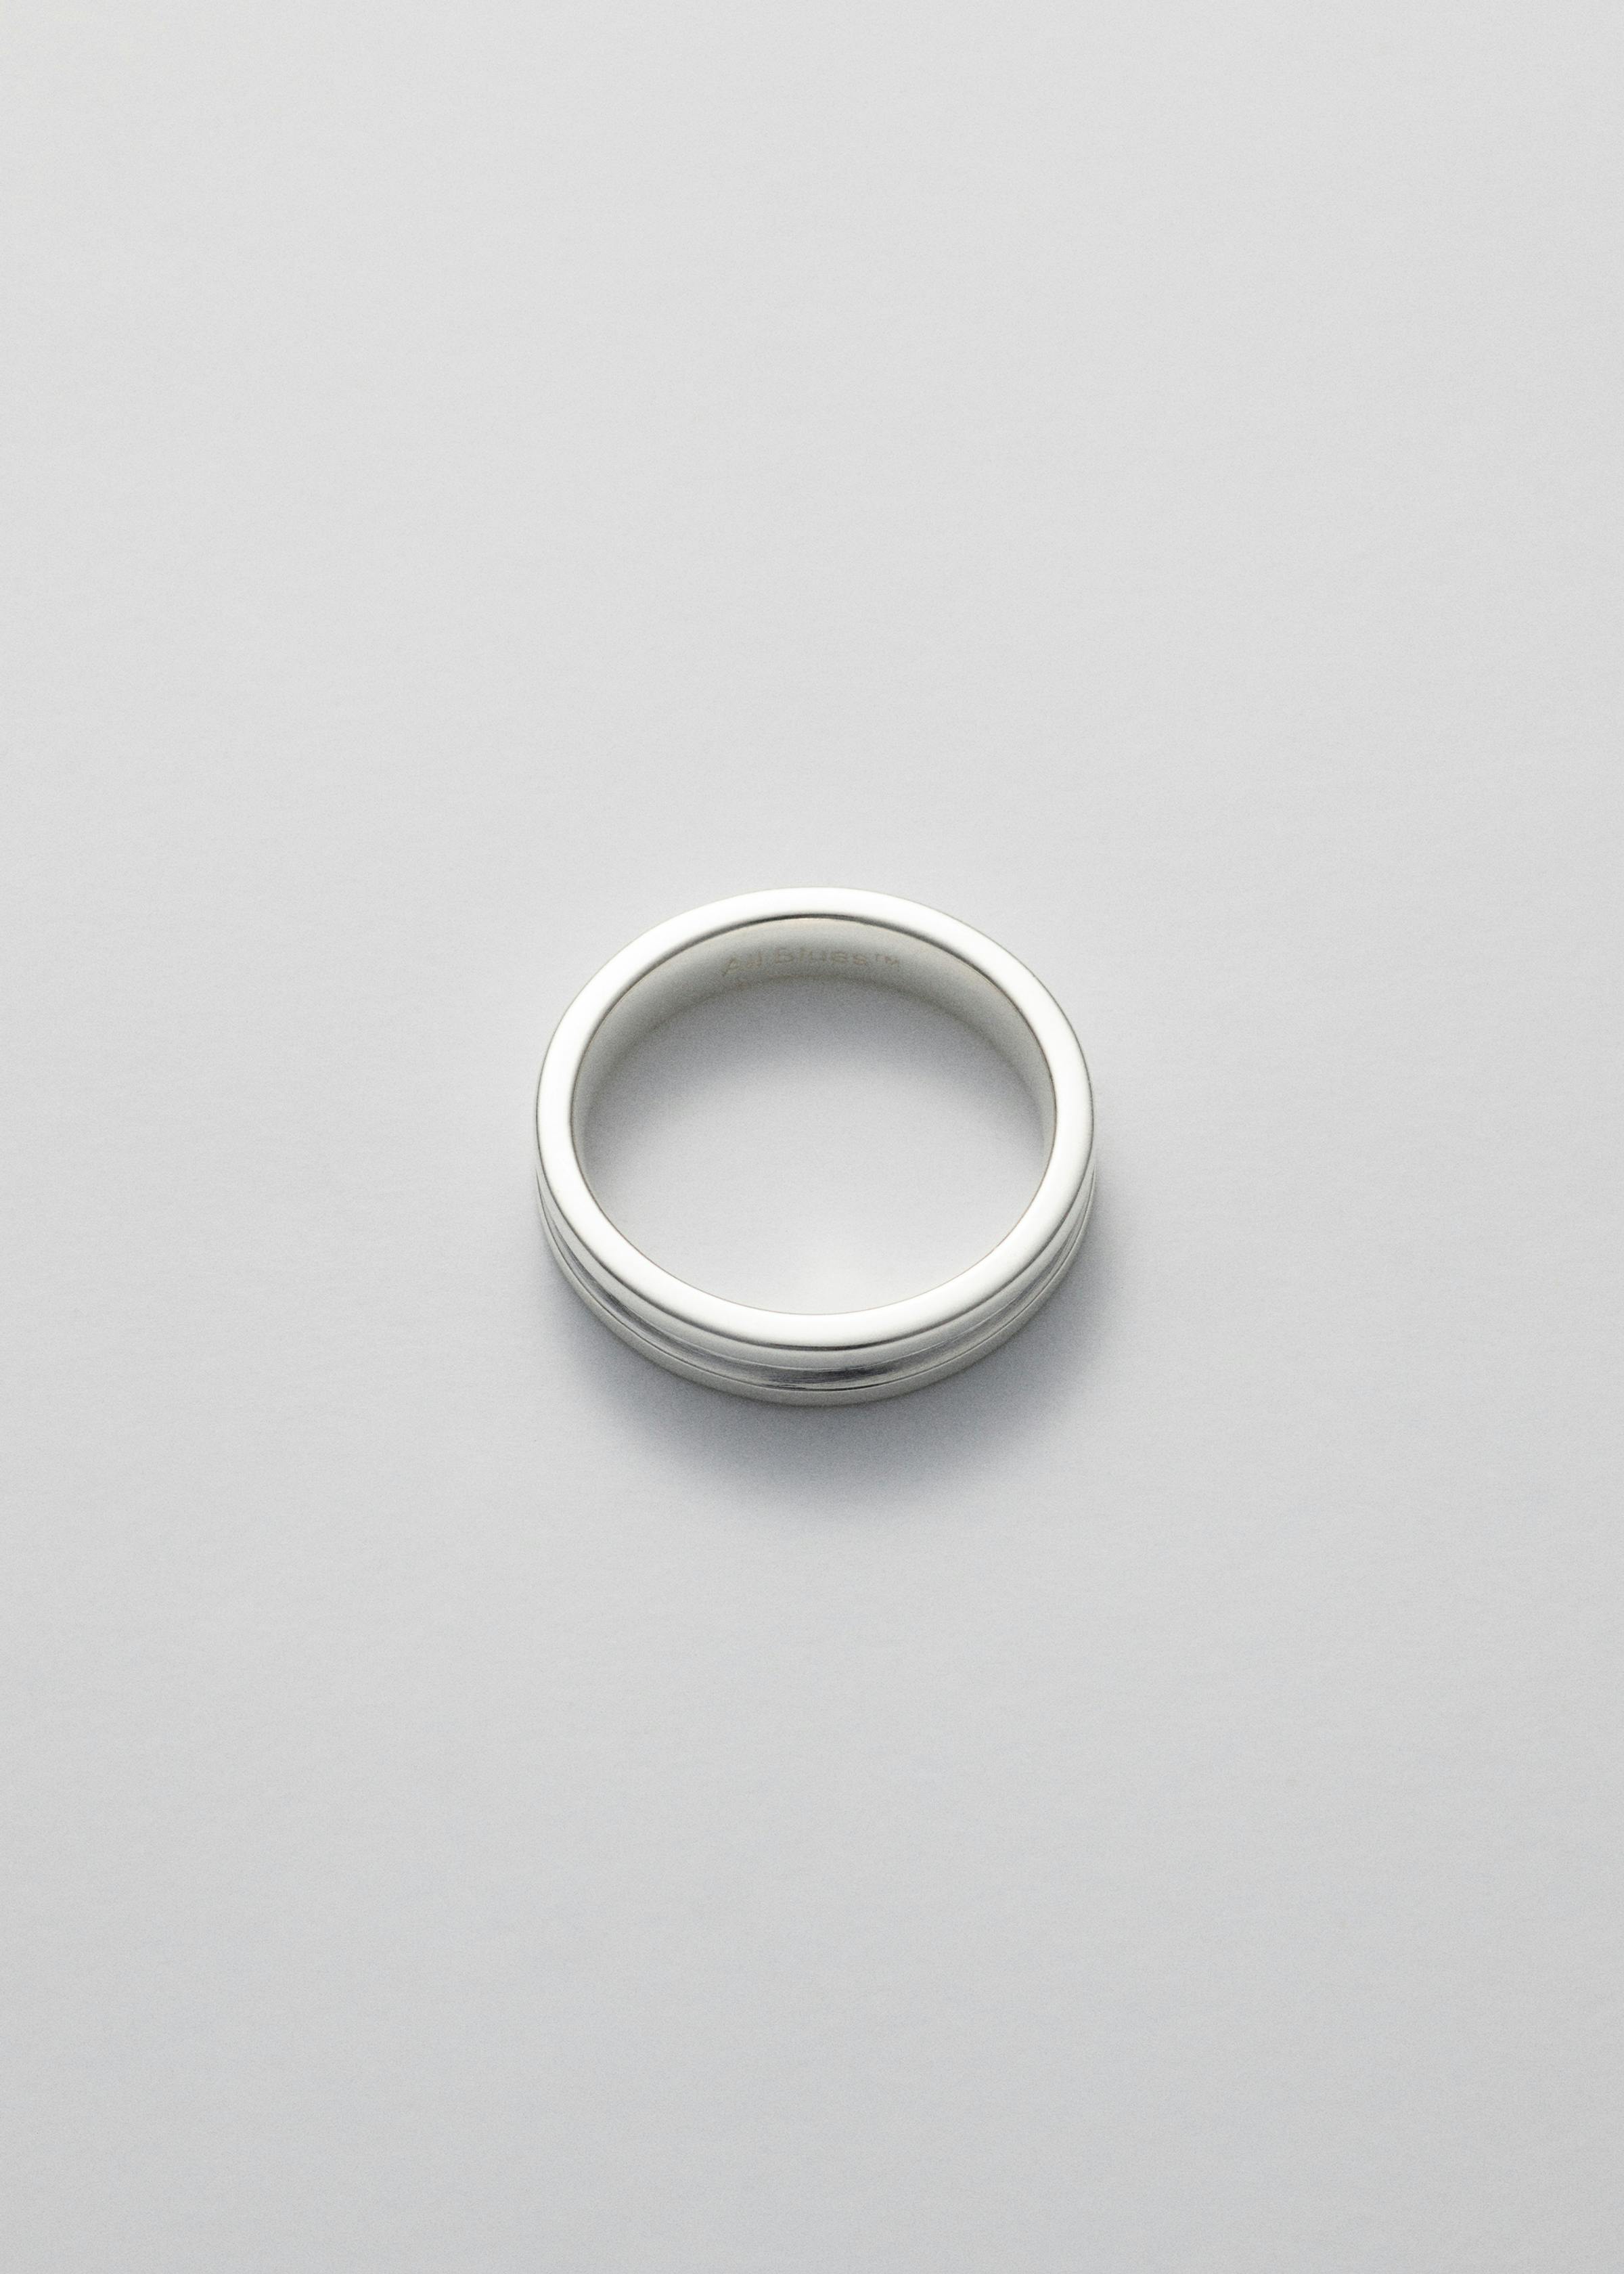 PD ring 02